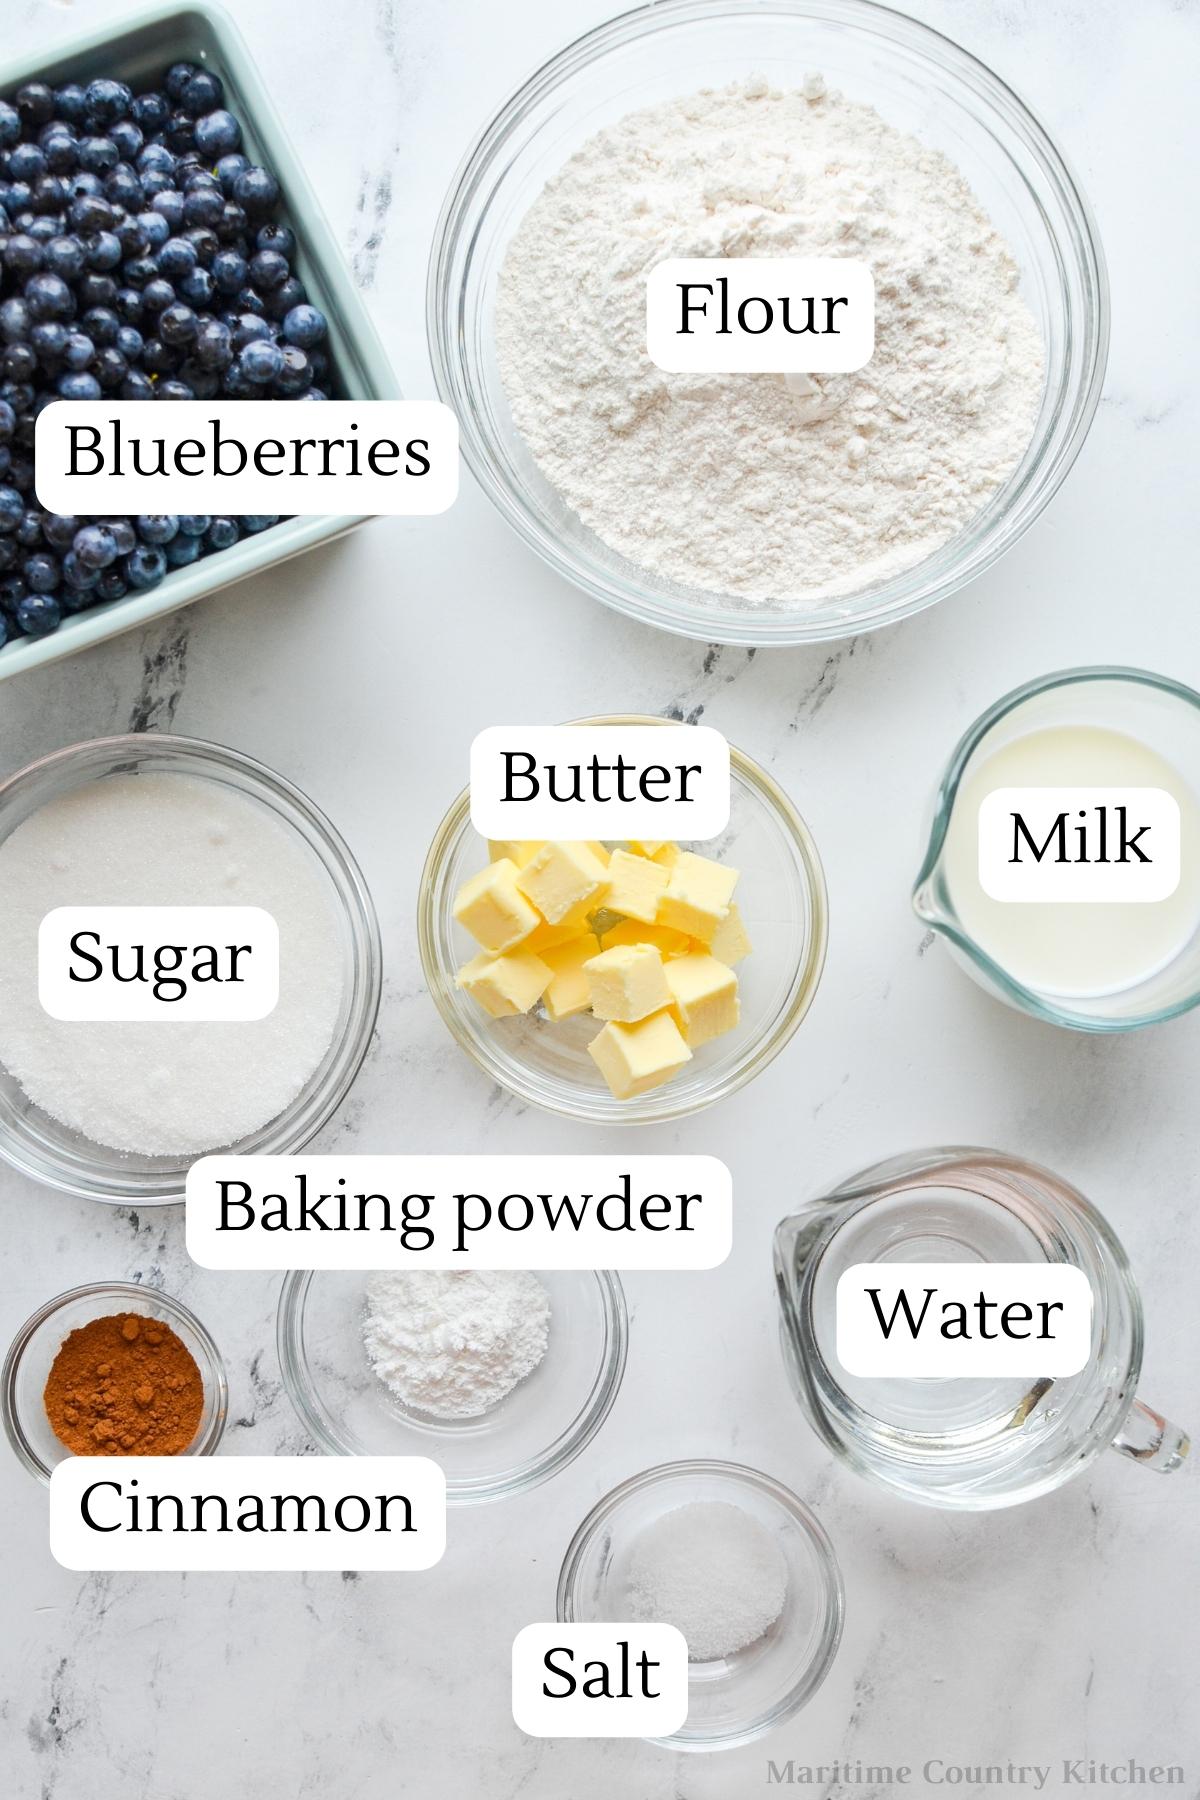 The ingredients needed to make blueberry grunt: blueberries, flour, butter, etc.